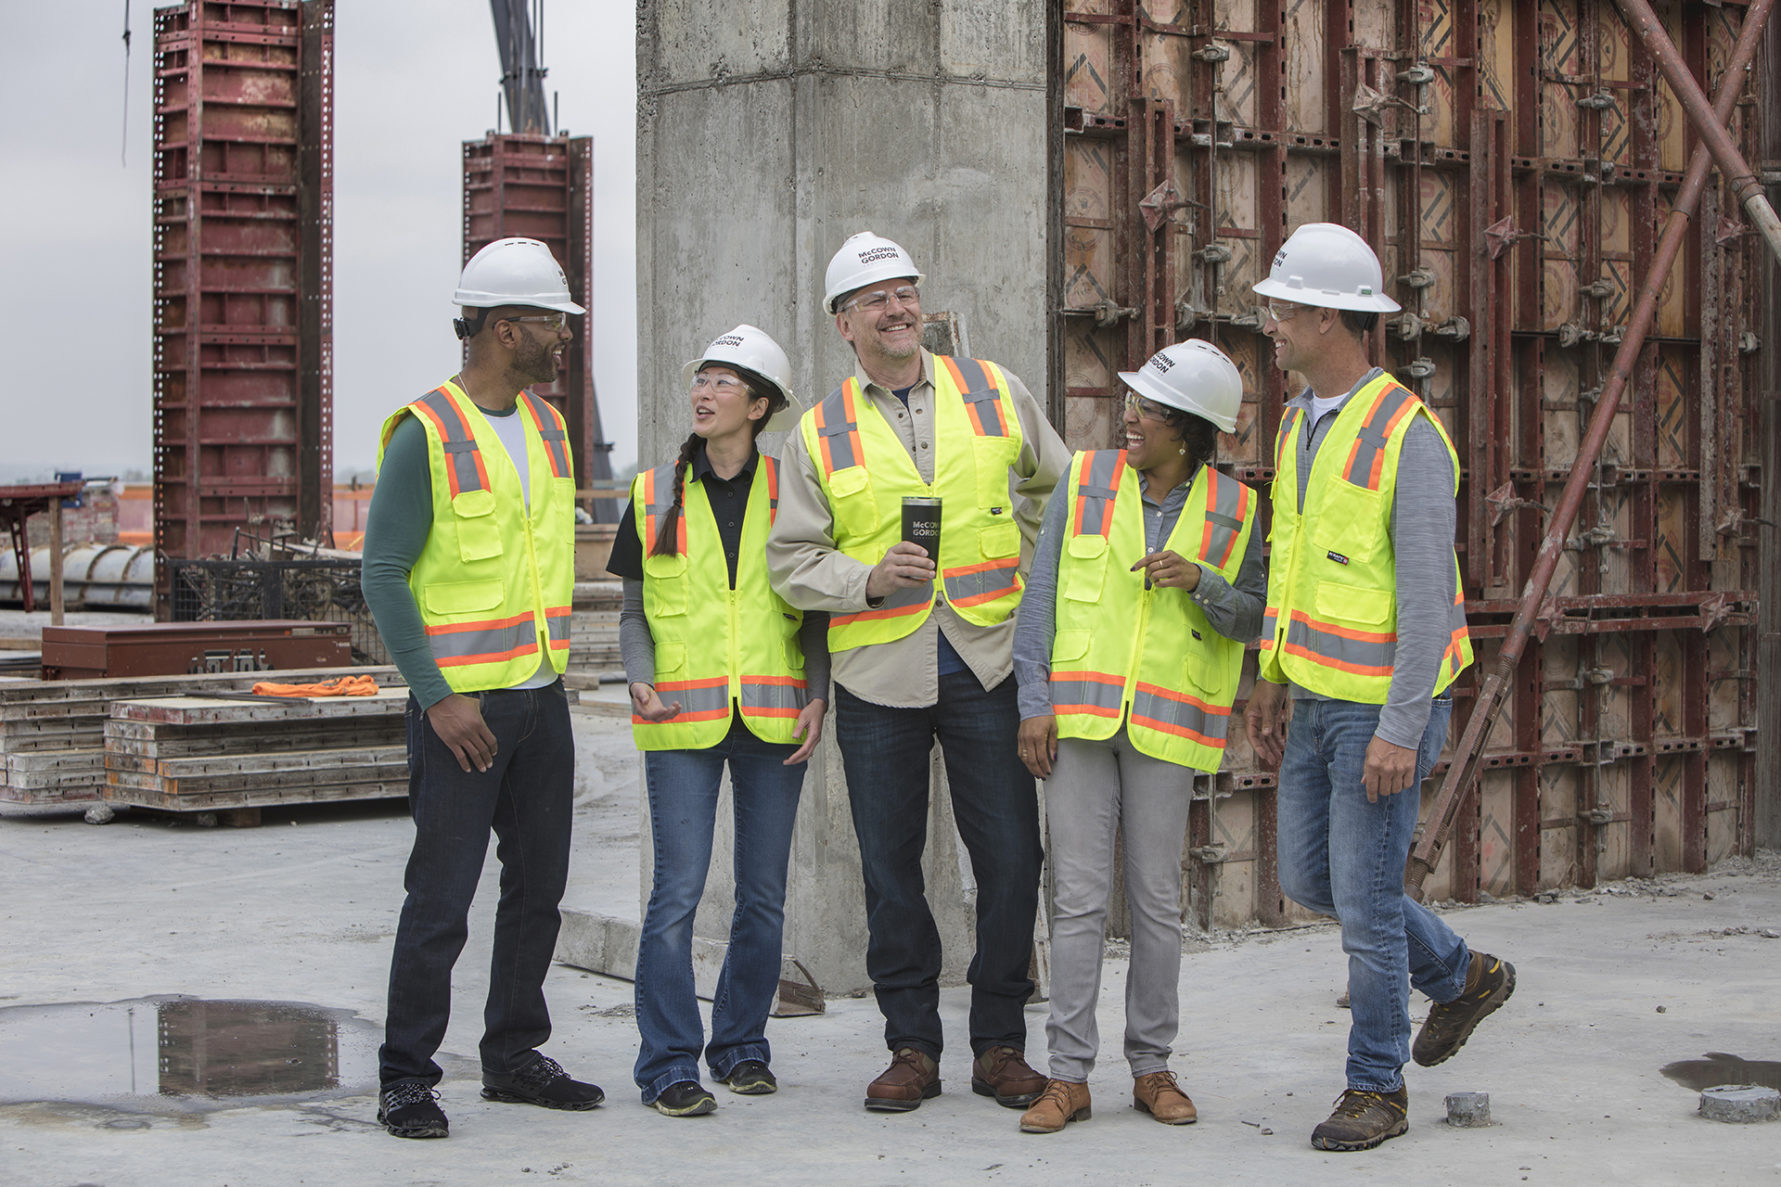 five McCownGordon employees with hardhats on the job site laughing